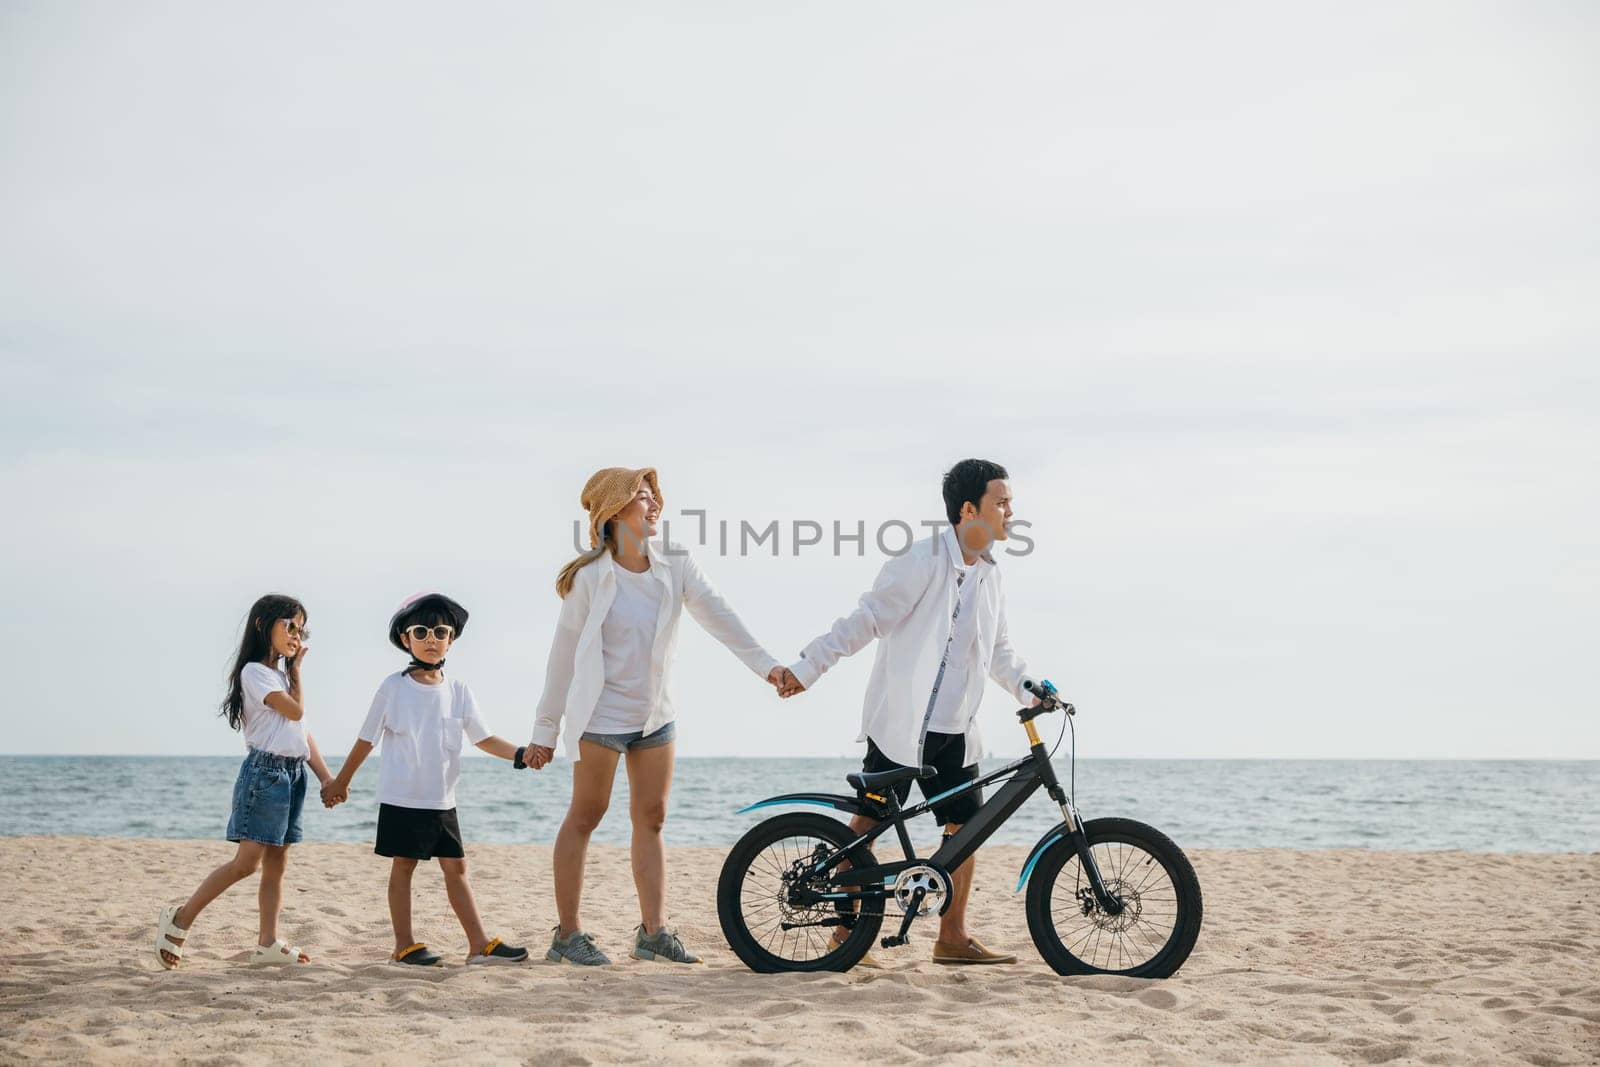 Parents and children enjoy a beach stroll with bicycles a scene full of happiness smiles and the carefree spirit of a childhood day. Family on beach vacation